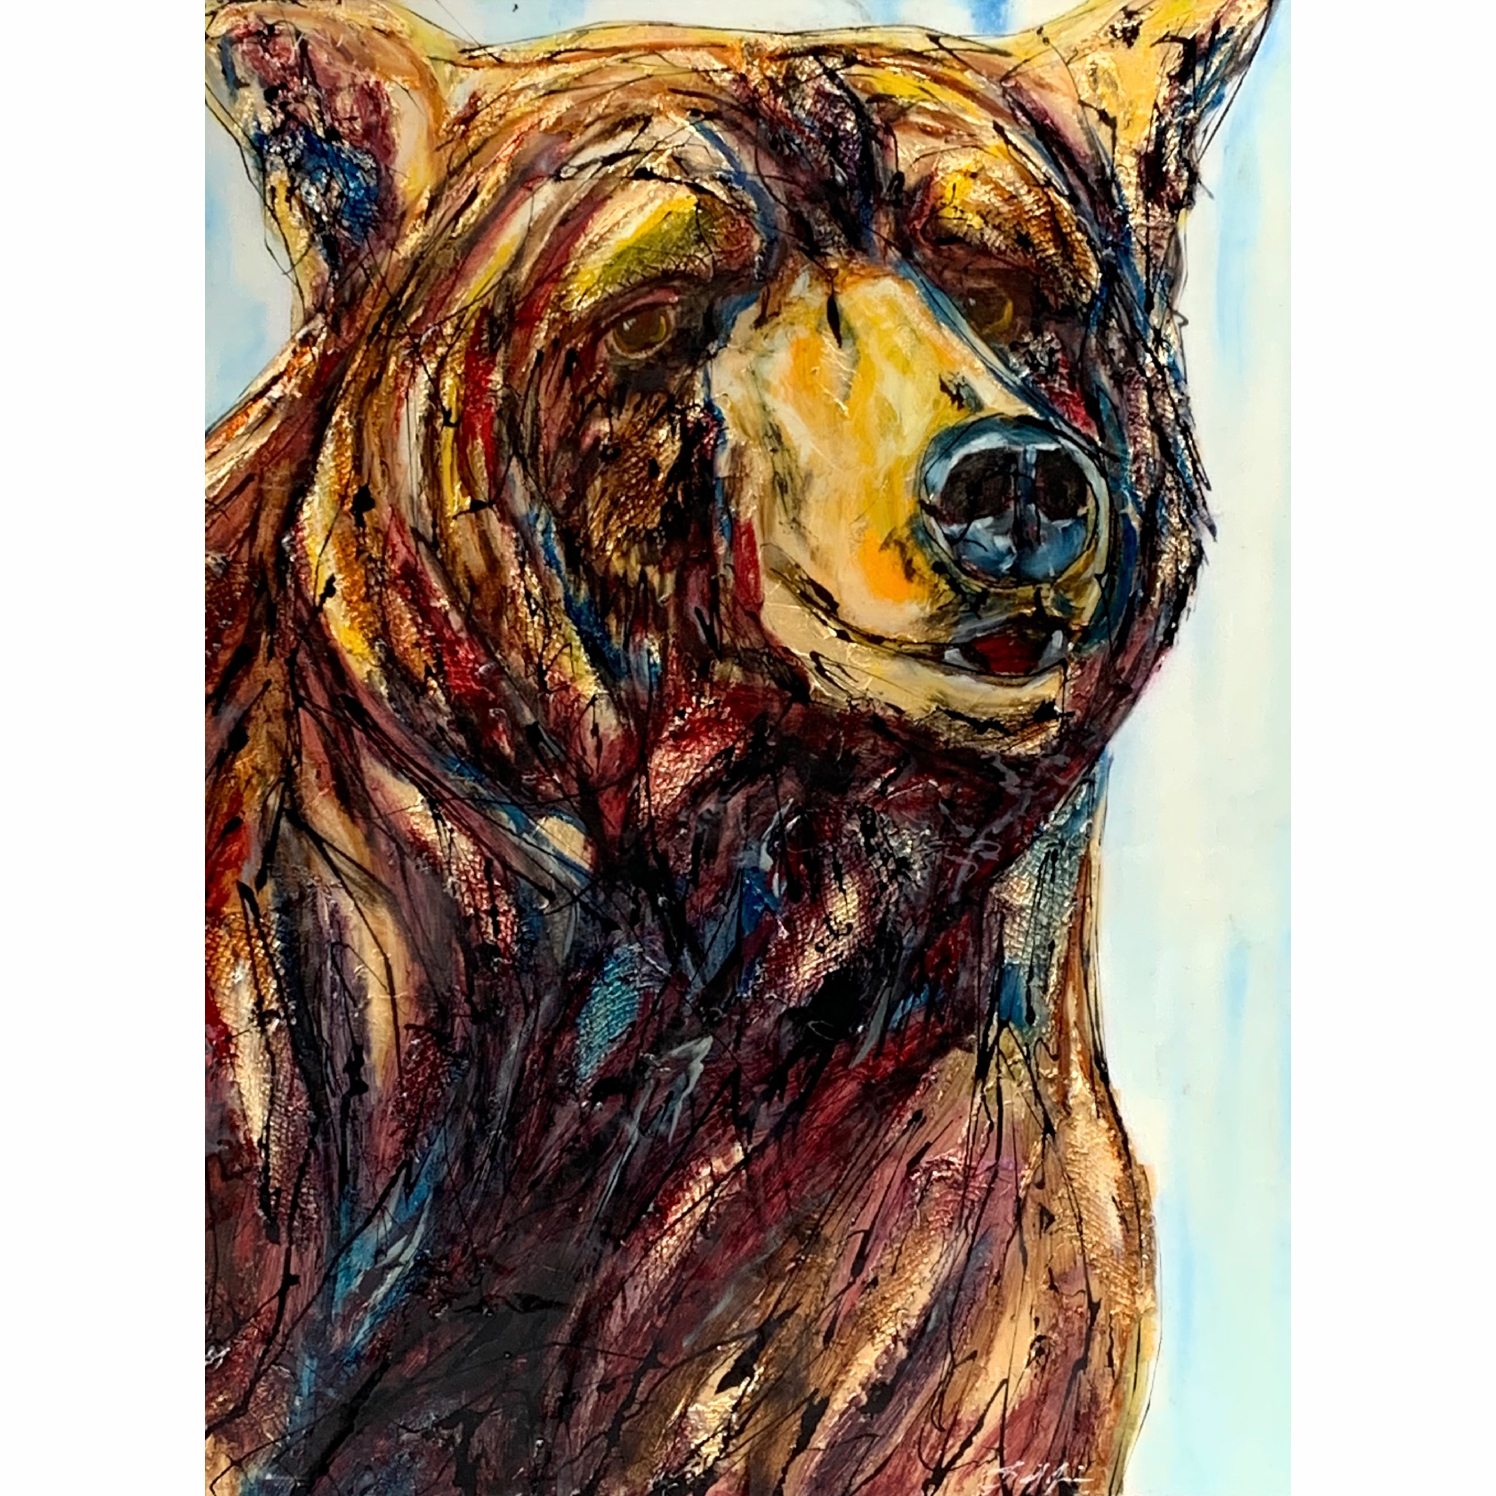 Ground of Being, original mixed media happy brown bear painting by David Zimmerman at Effusion Art Gallery in Invermere, BC.